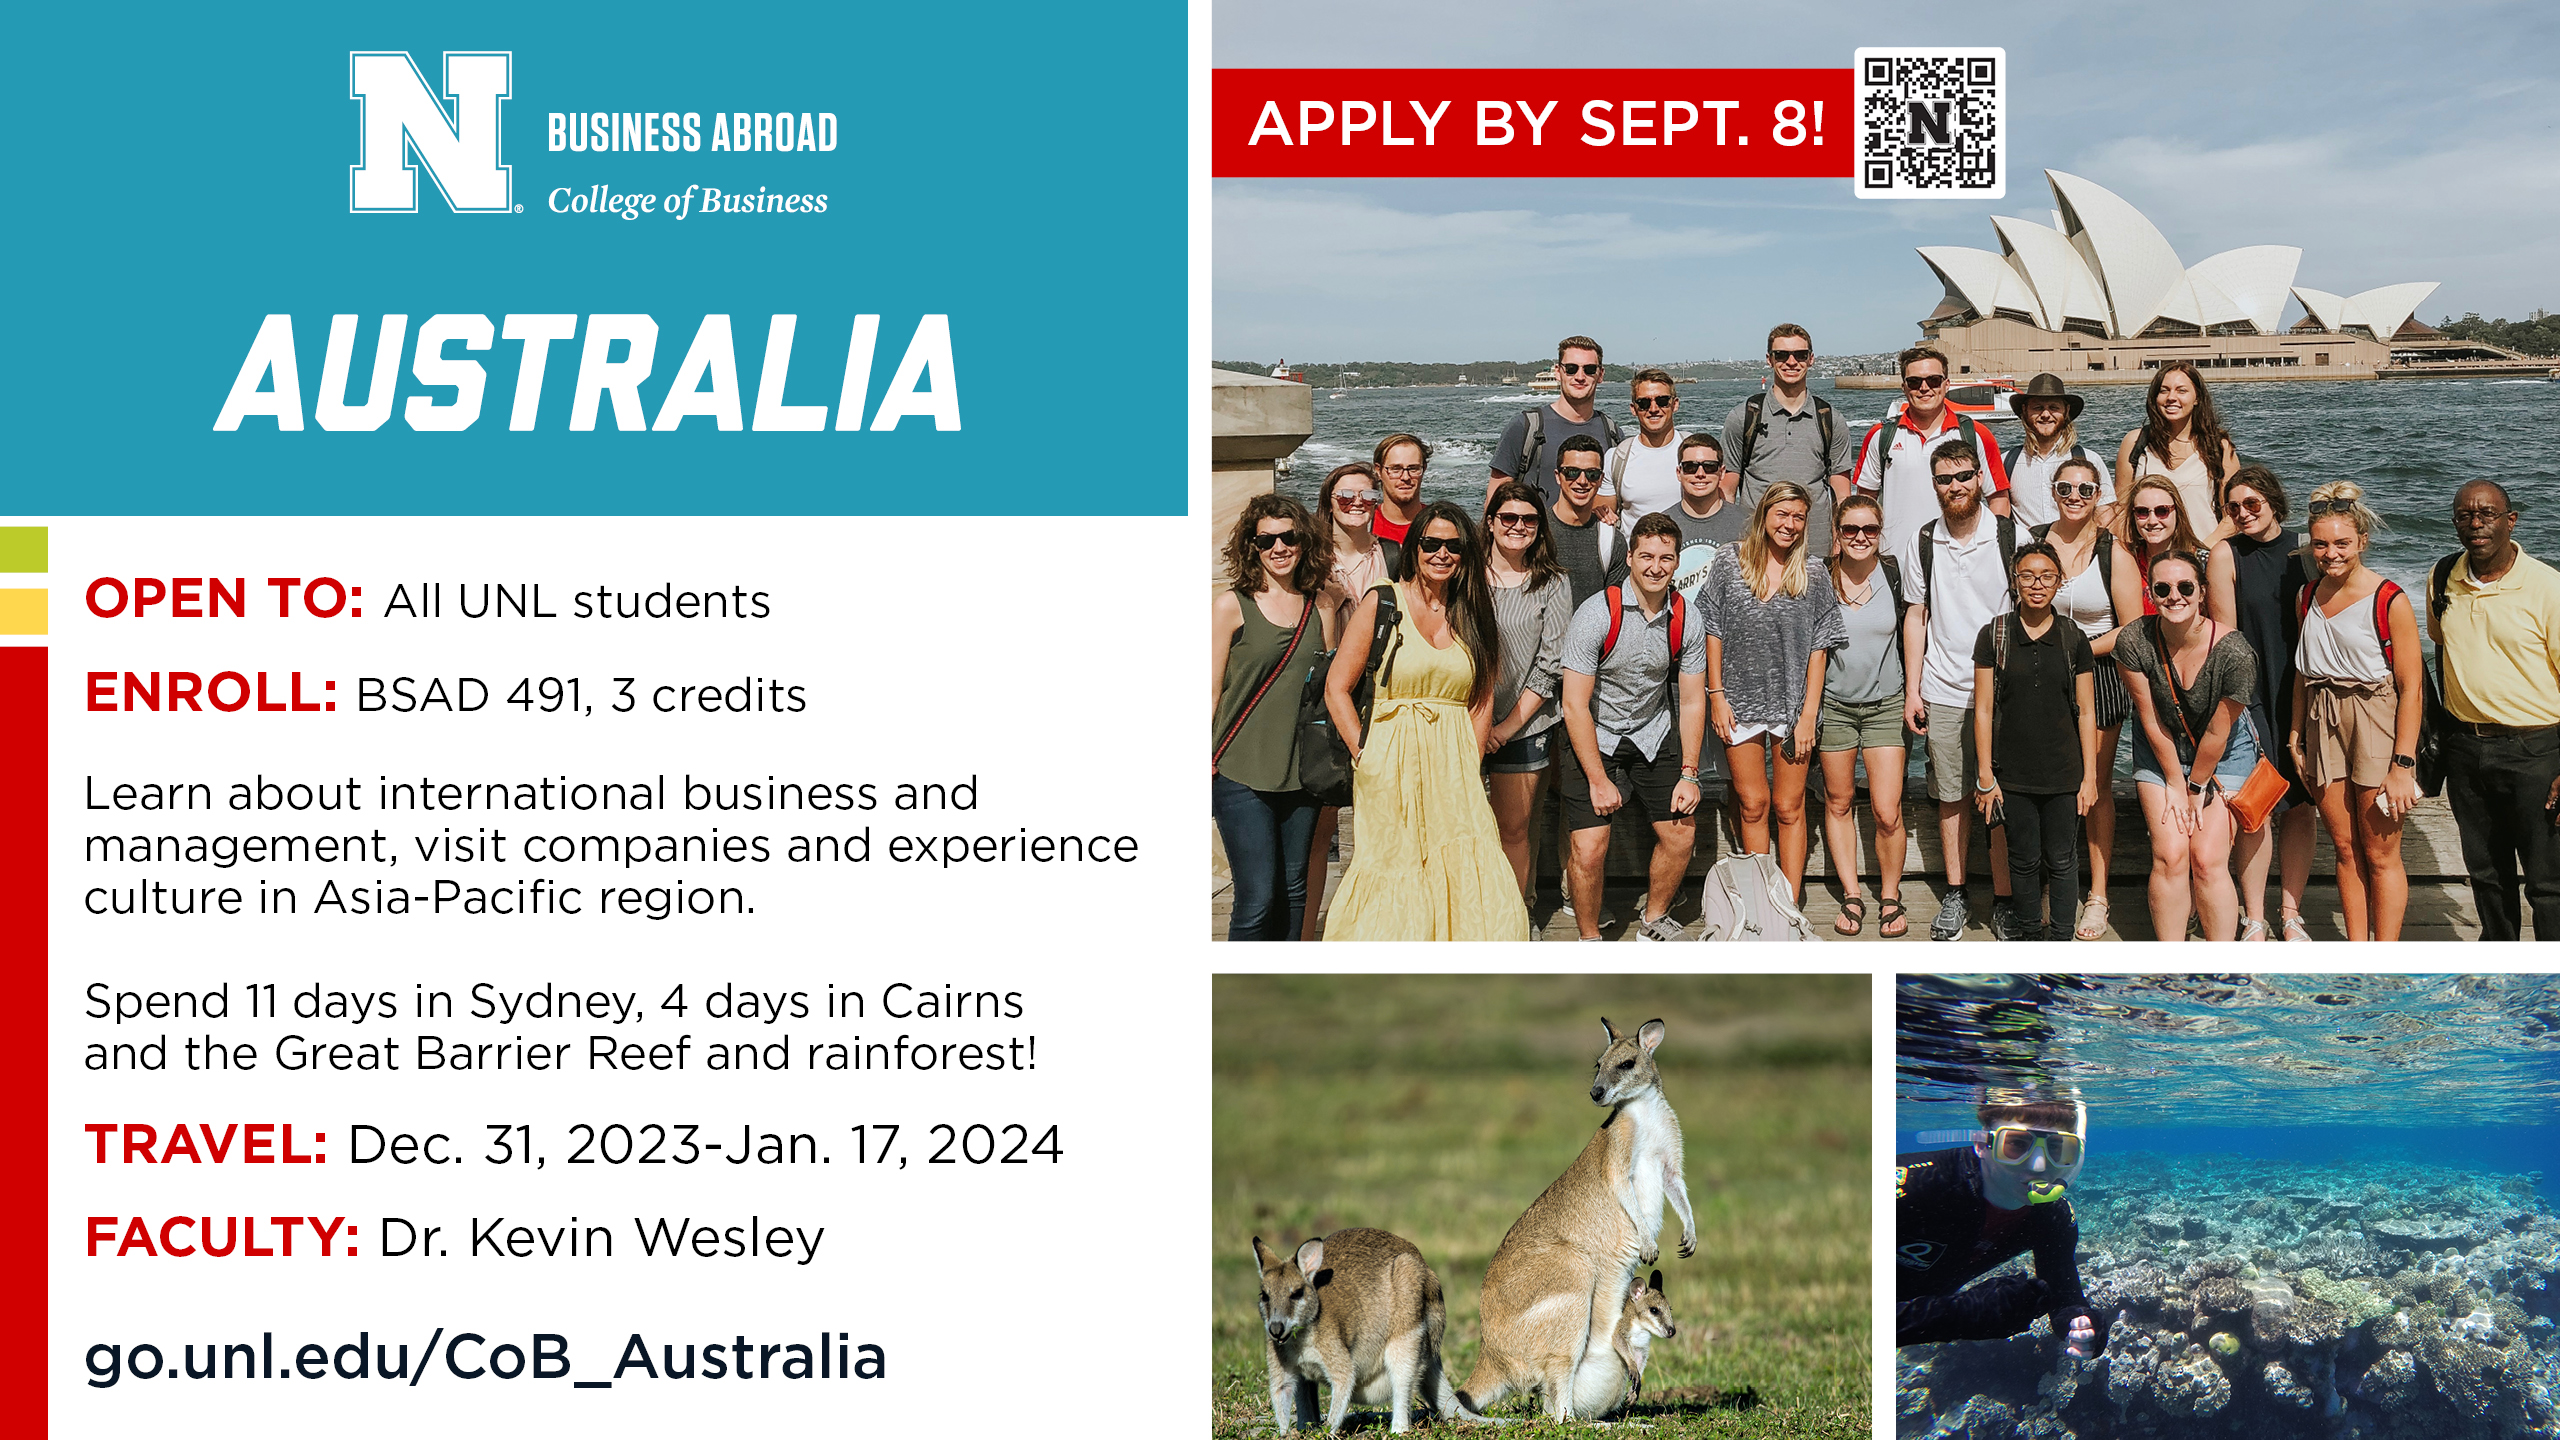 Applications for Study Abroad Australia are open! Announce